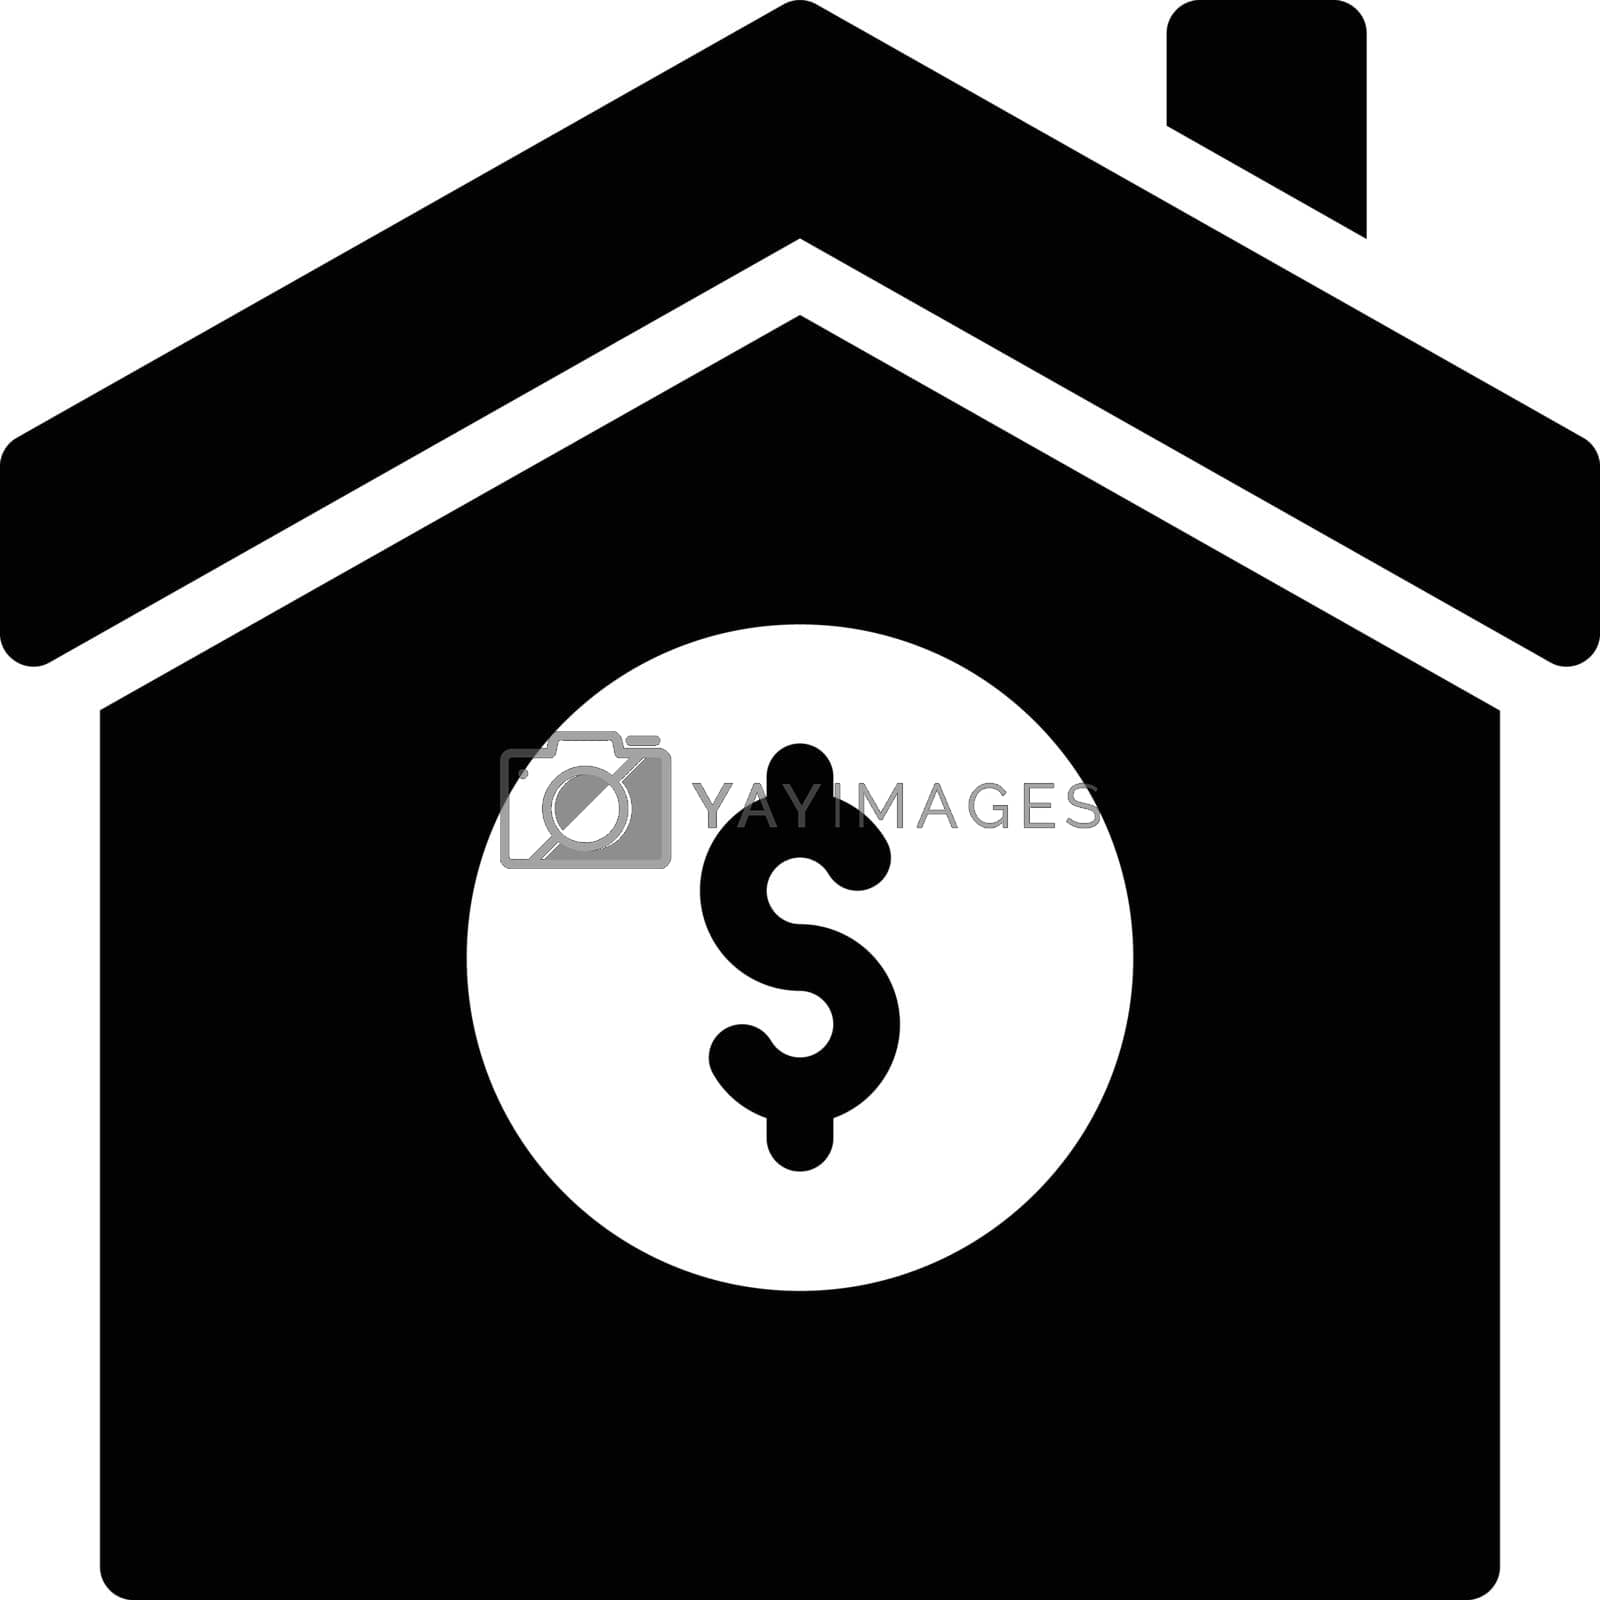 Royalty free image of house by FlaticonsDesign